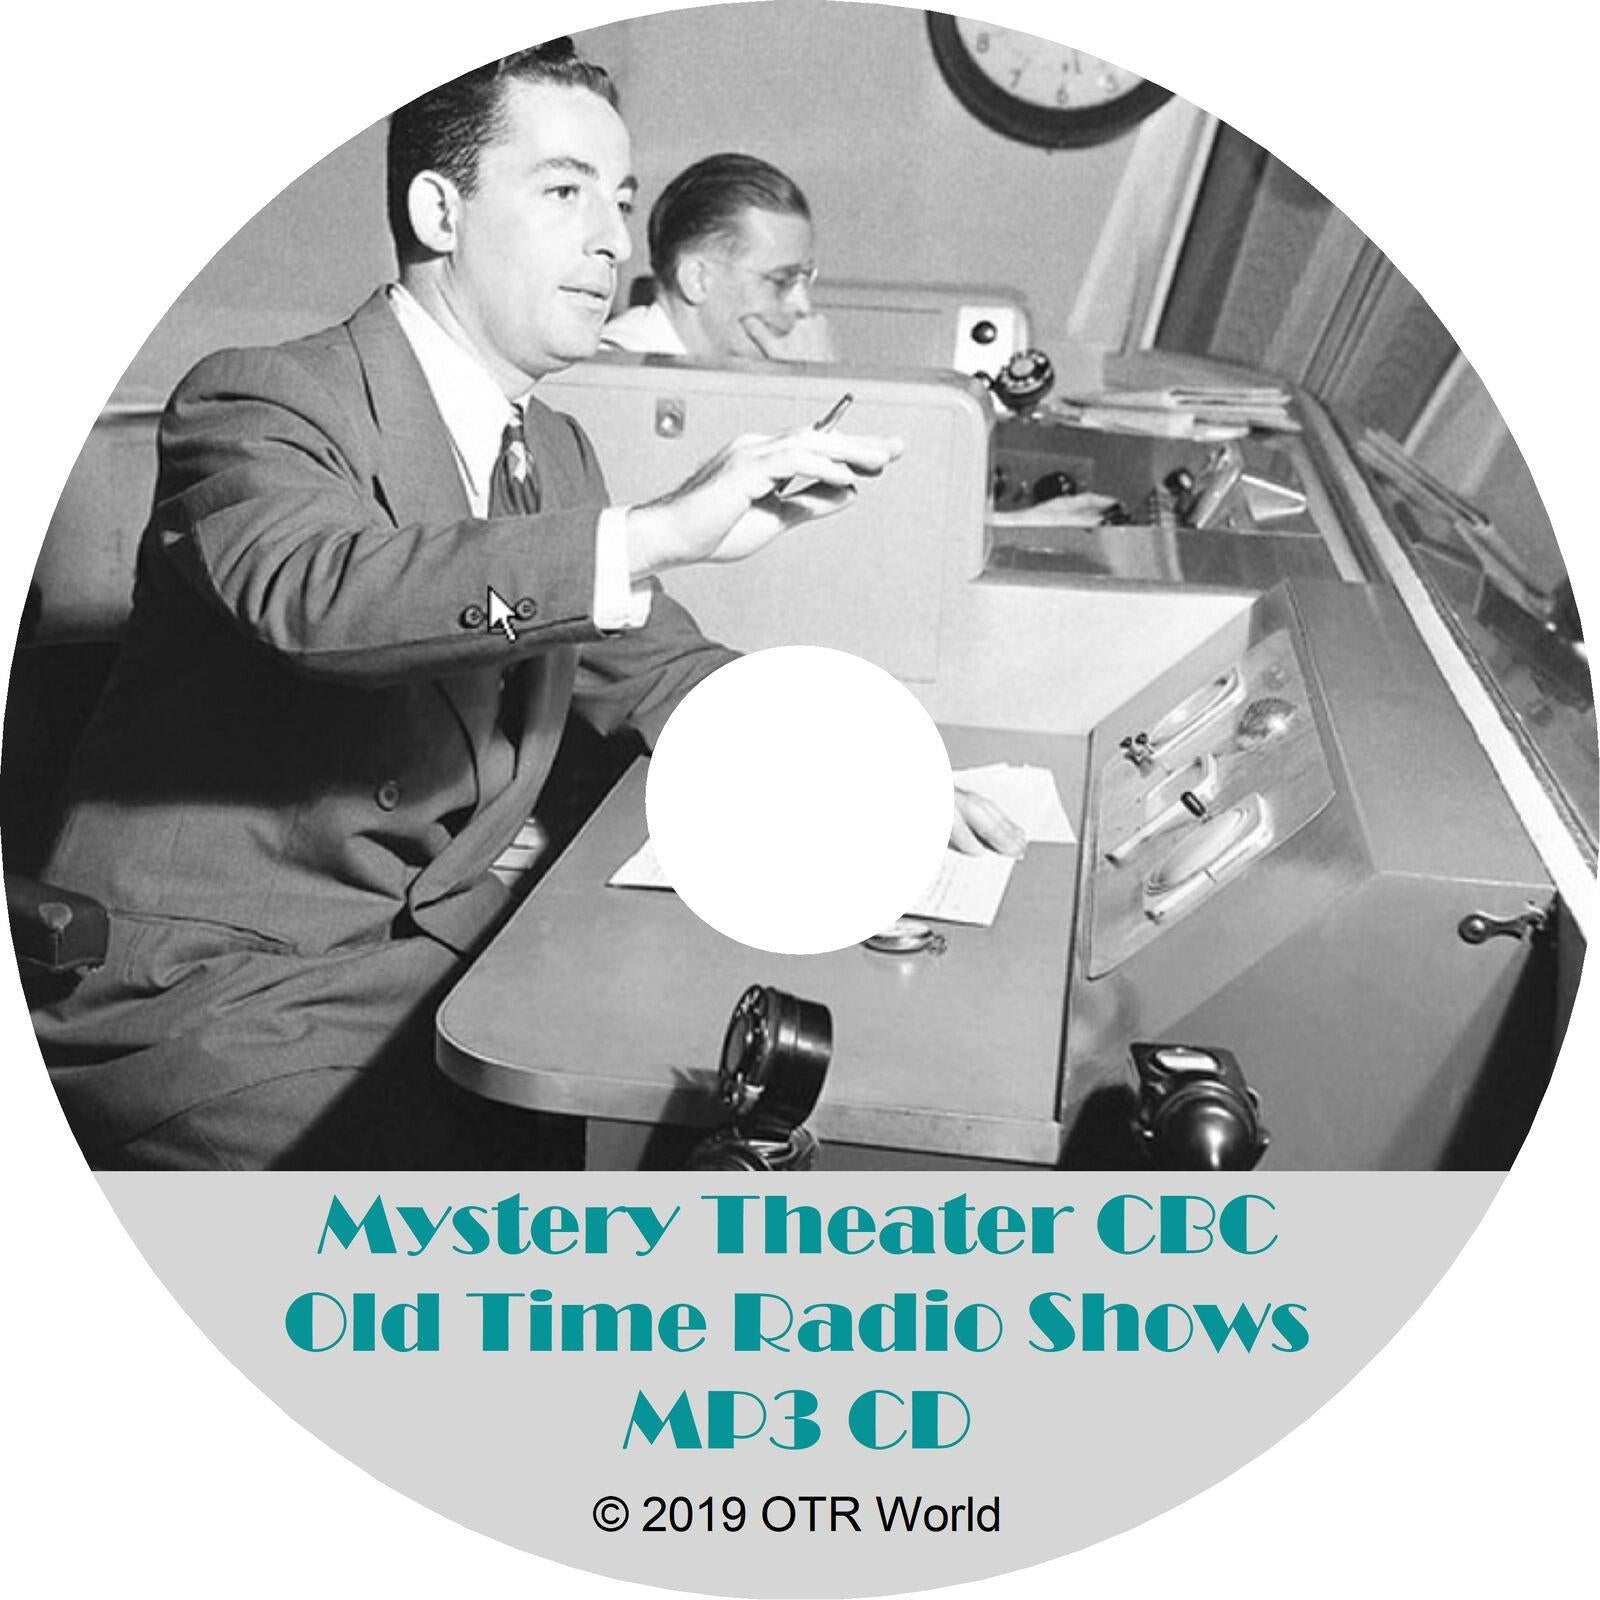 Mystery Theater CBC Old Time Radio Shows 17 Episodes On MP3 CD OTR OTRS